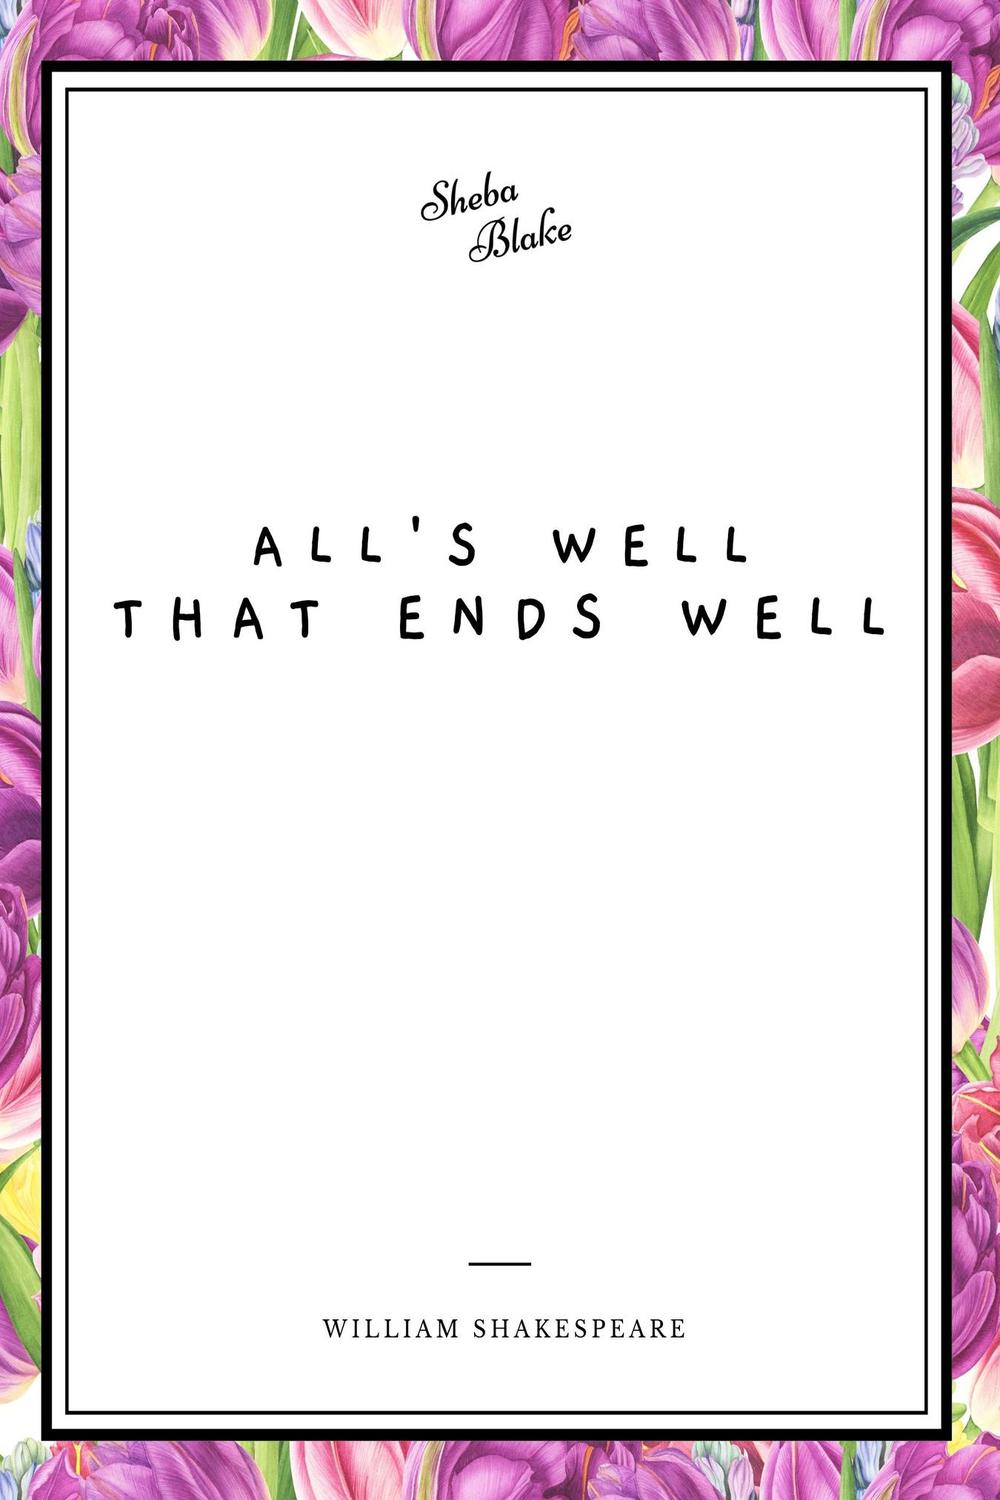 All's Well That Ends Well - William Shakespeare,,Sheba Blake